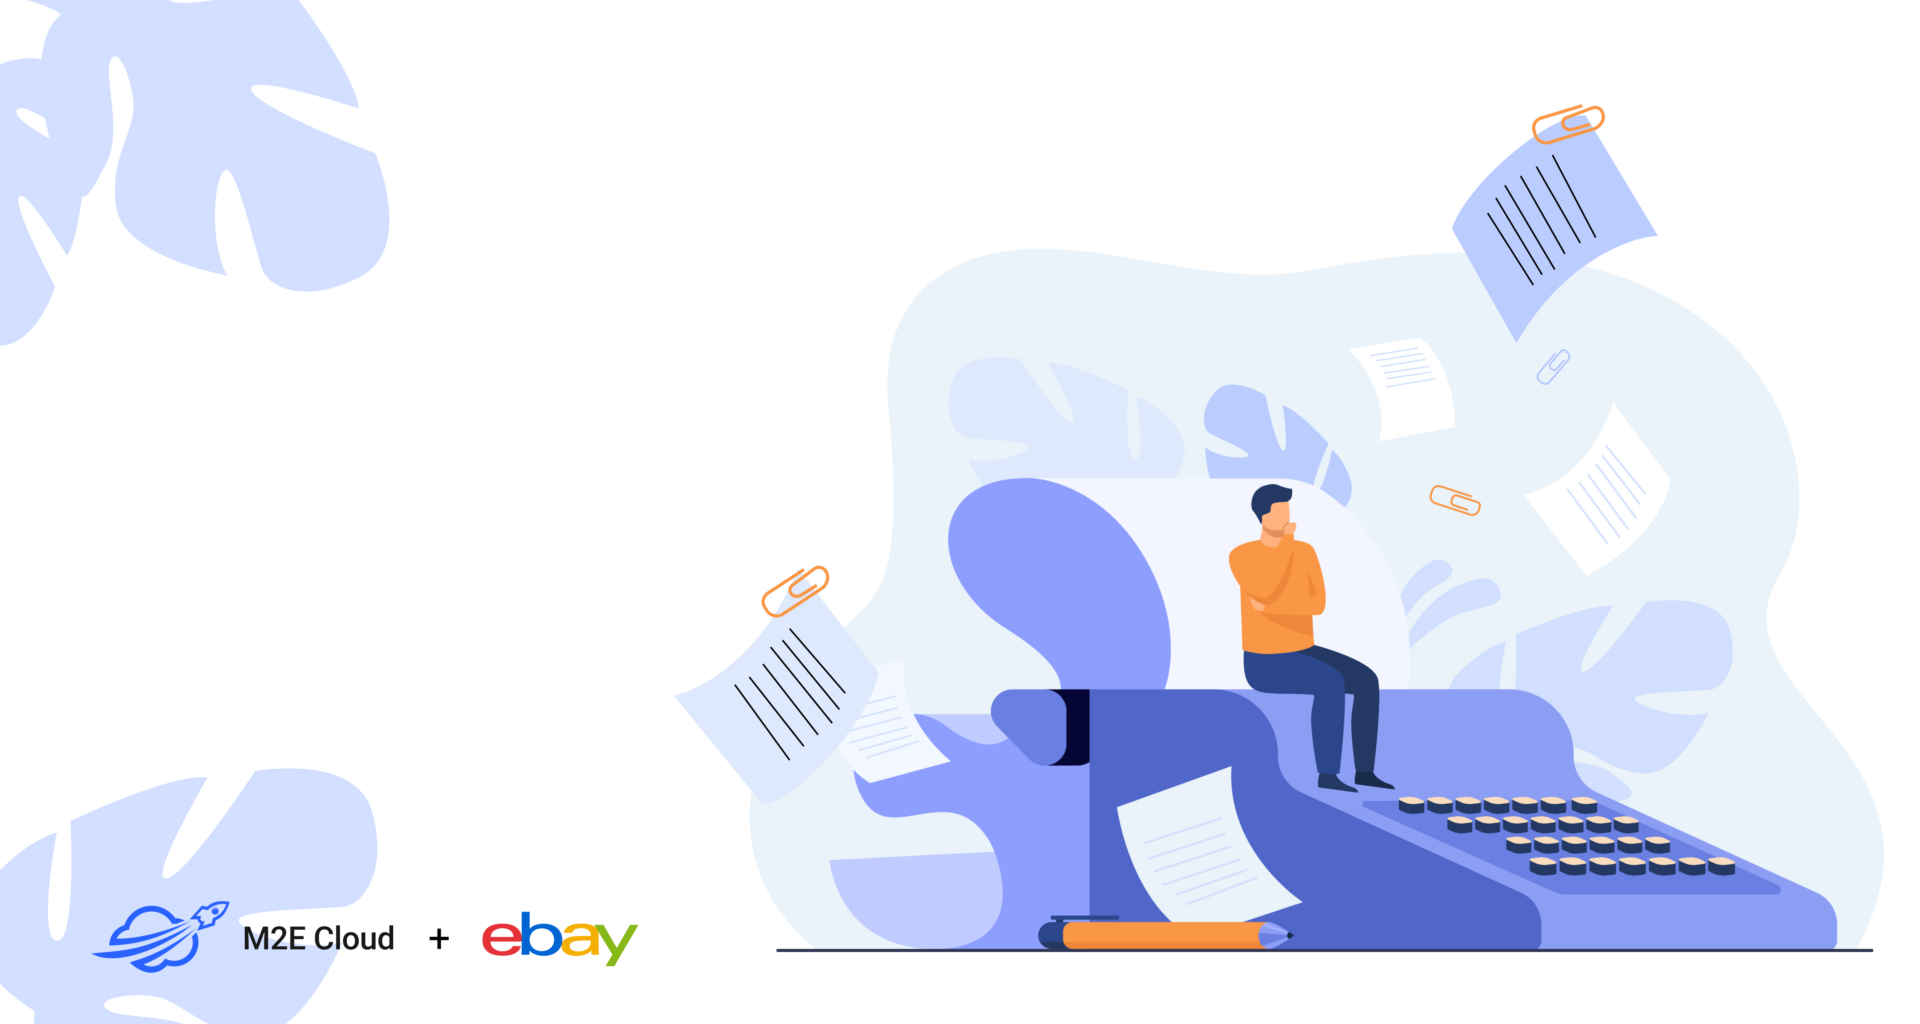 Crafting an eBay Description Using Templates: A How-To Guide